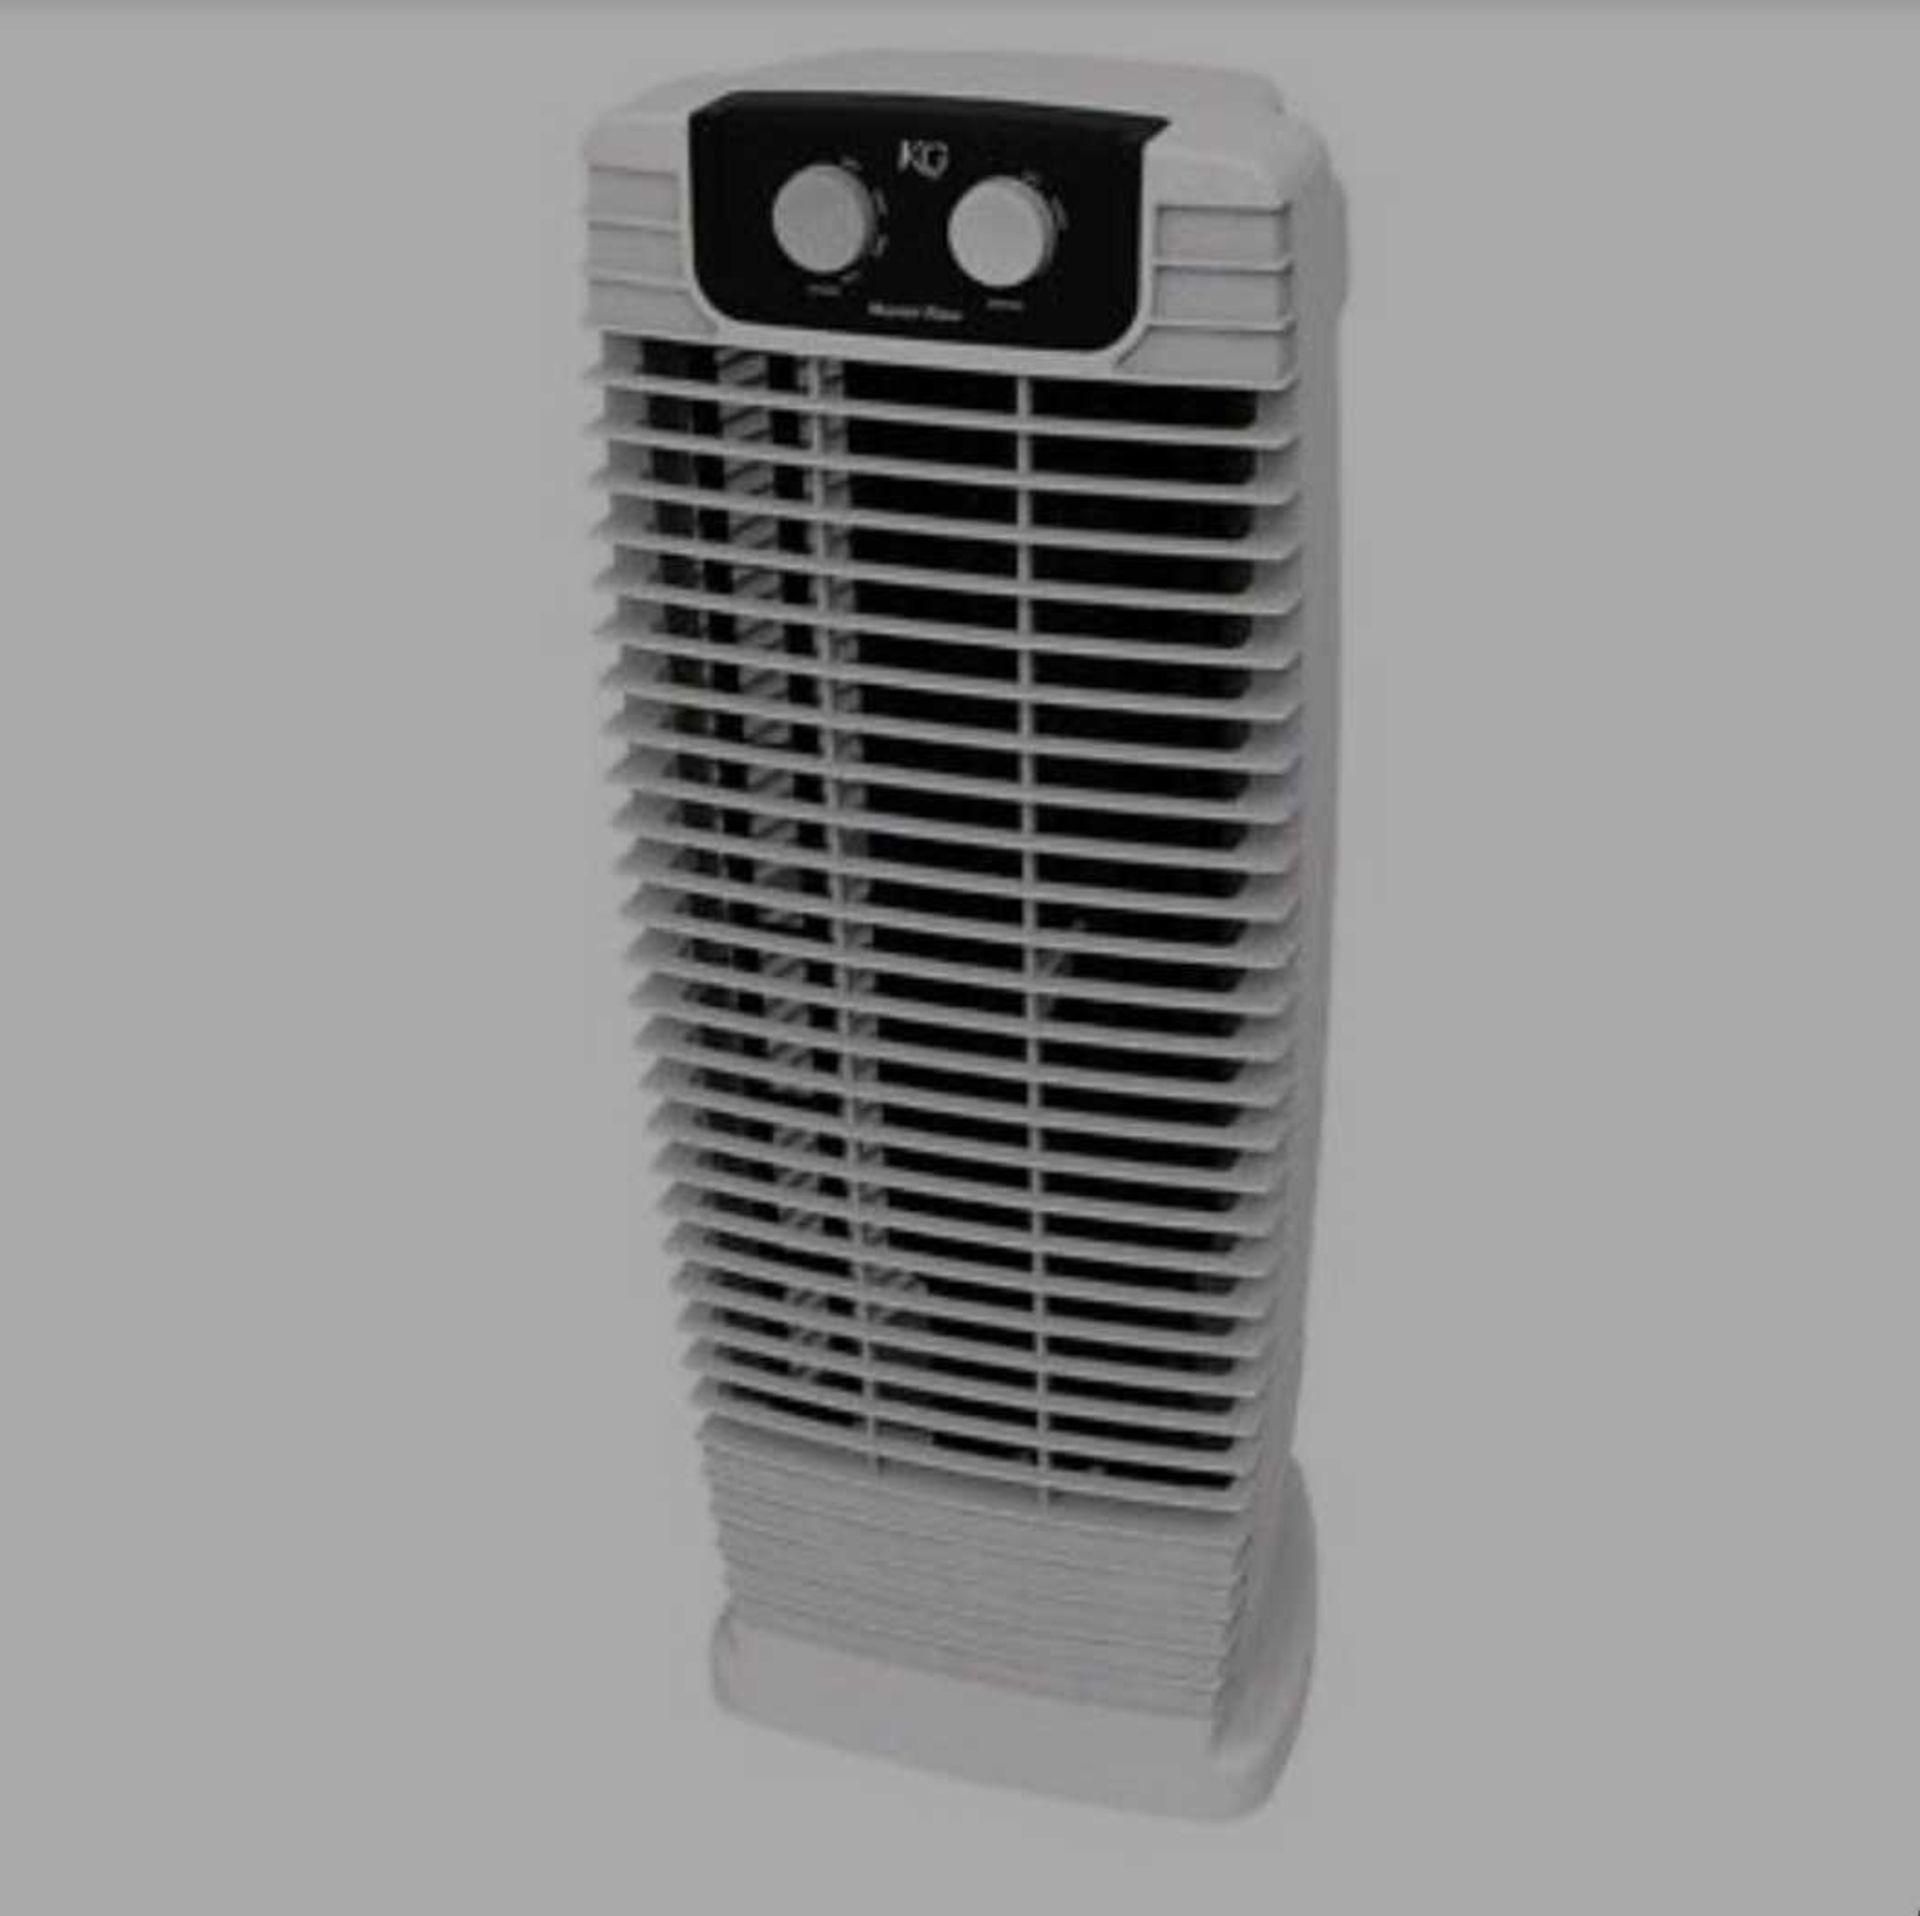 RRP £100 Boxed Kg Master Flow Tower Fan - Image 2 of 2